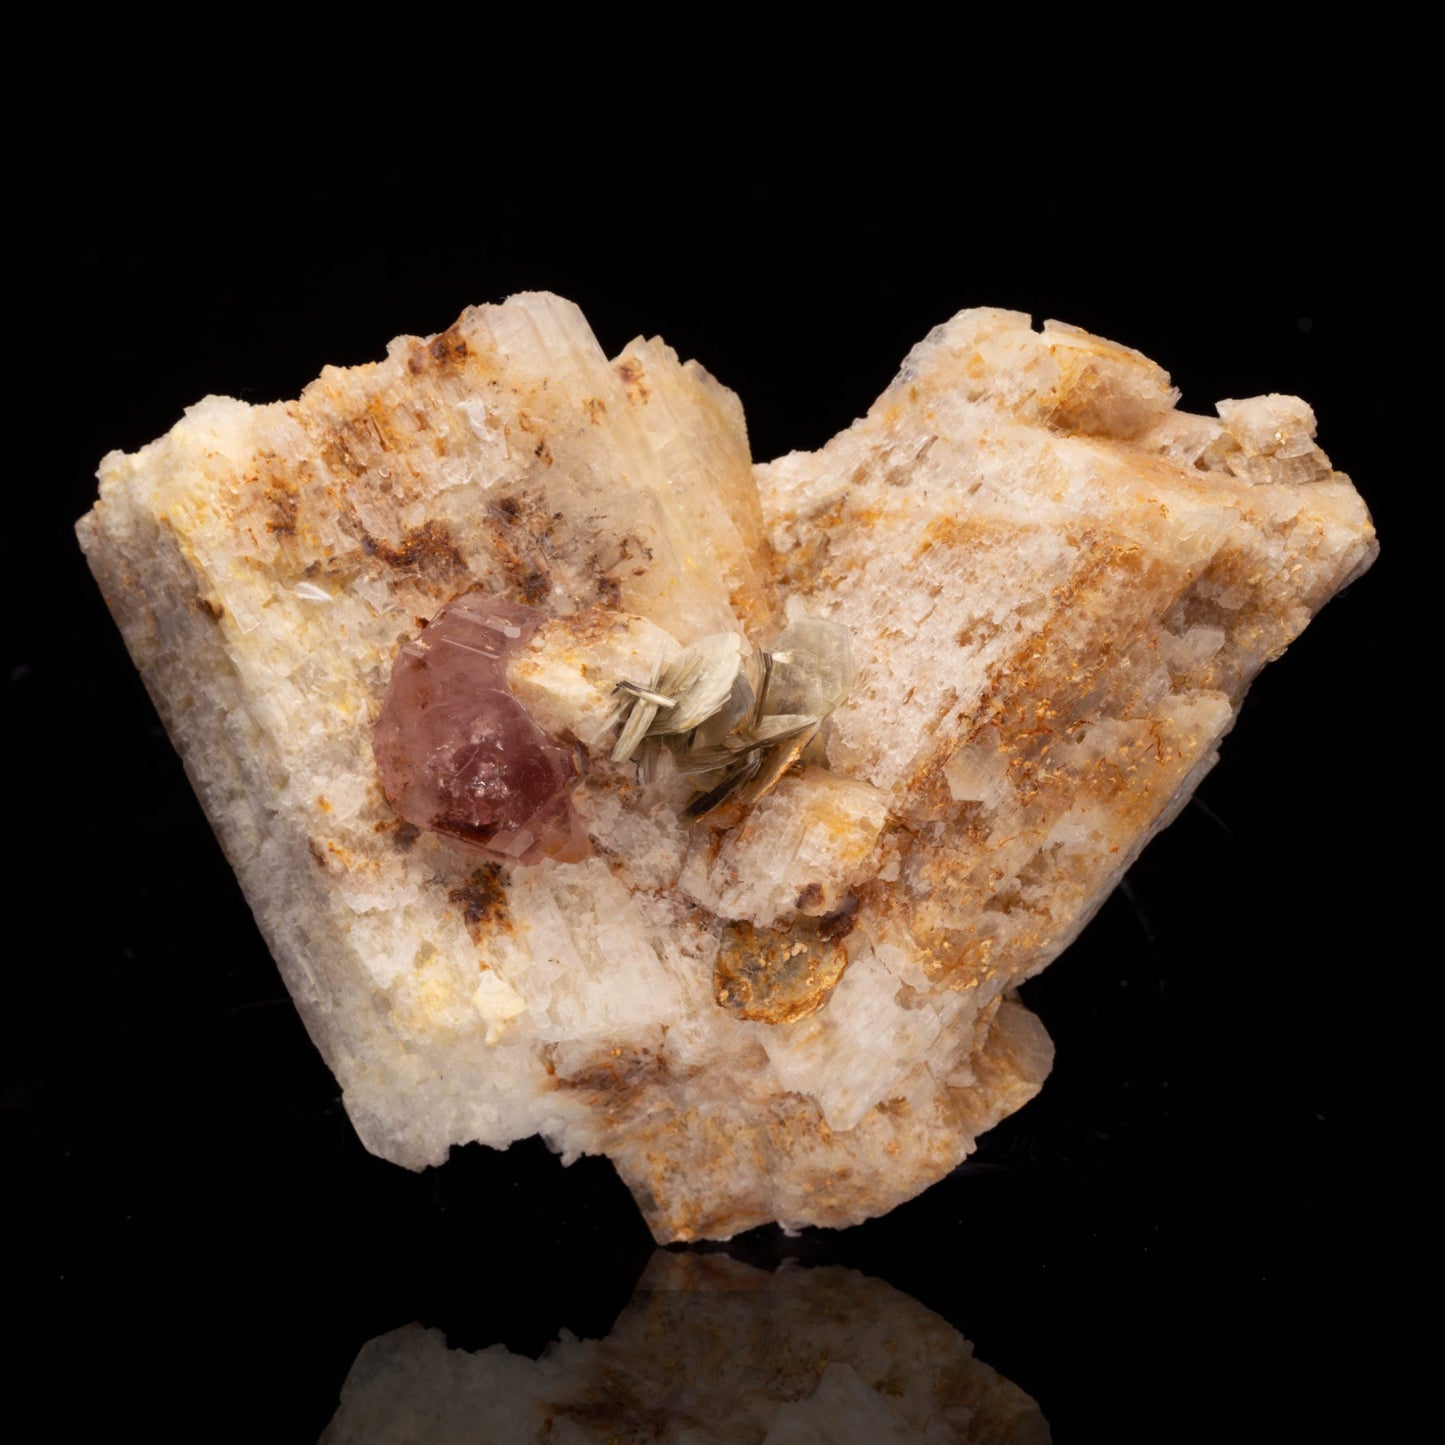 Pink Apatite with Muscovite on Microcline // 1.27 Lb.